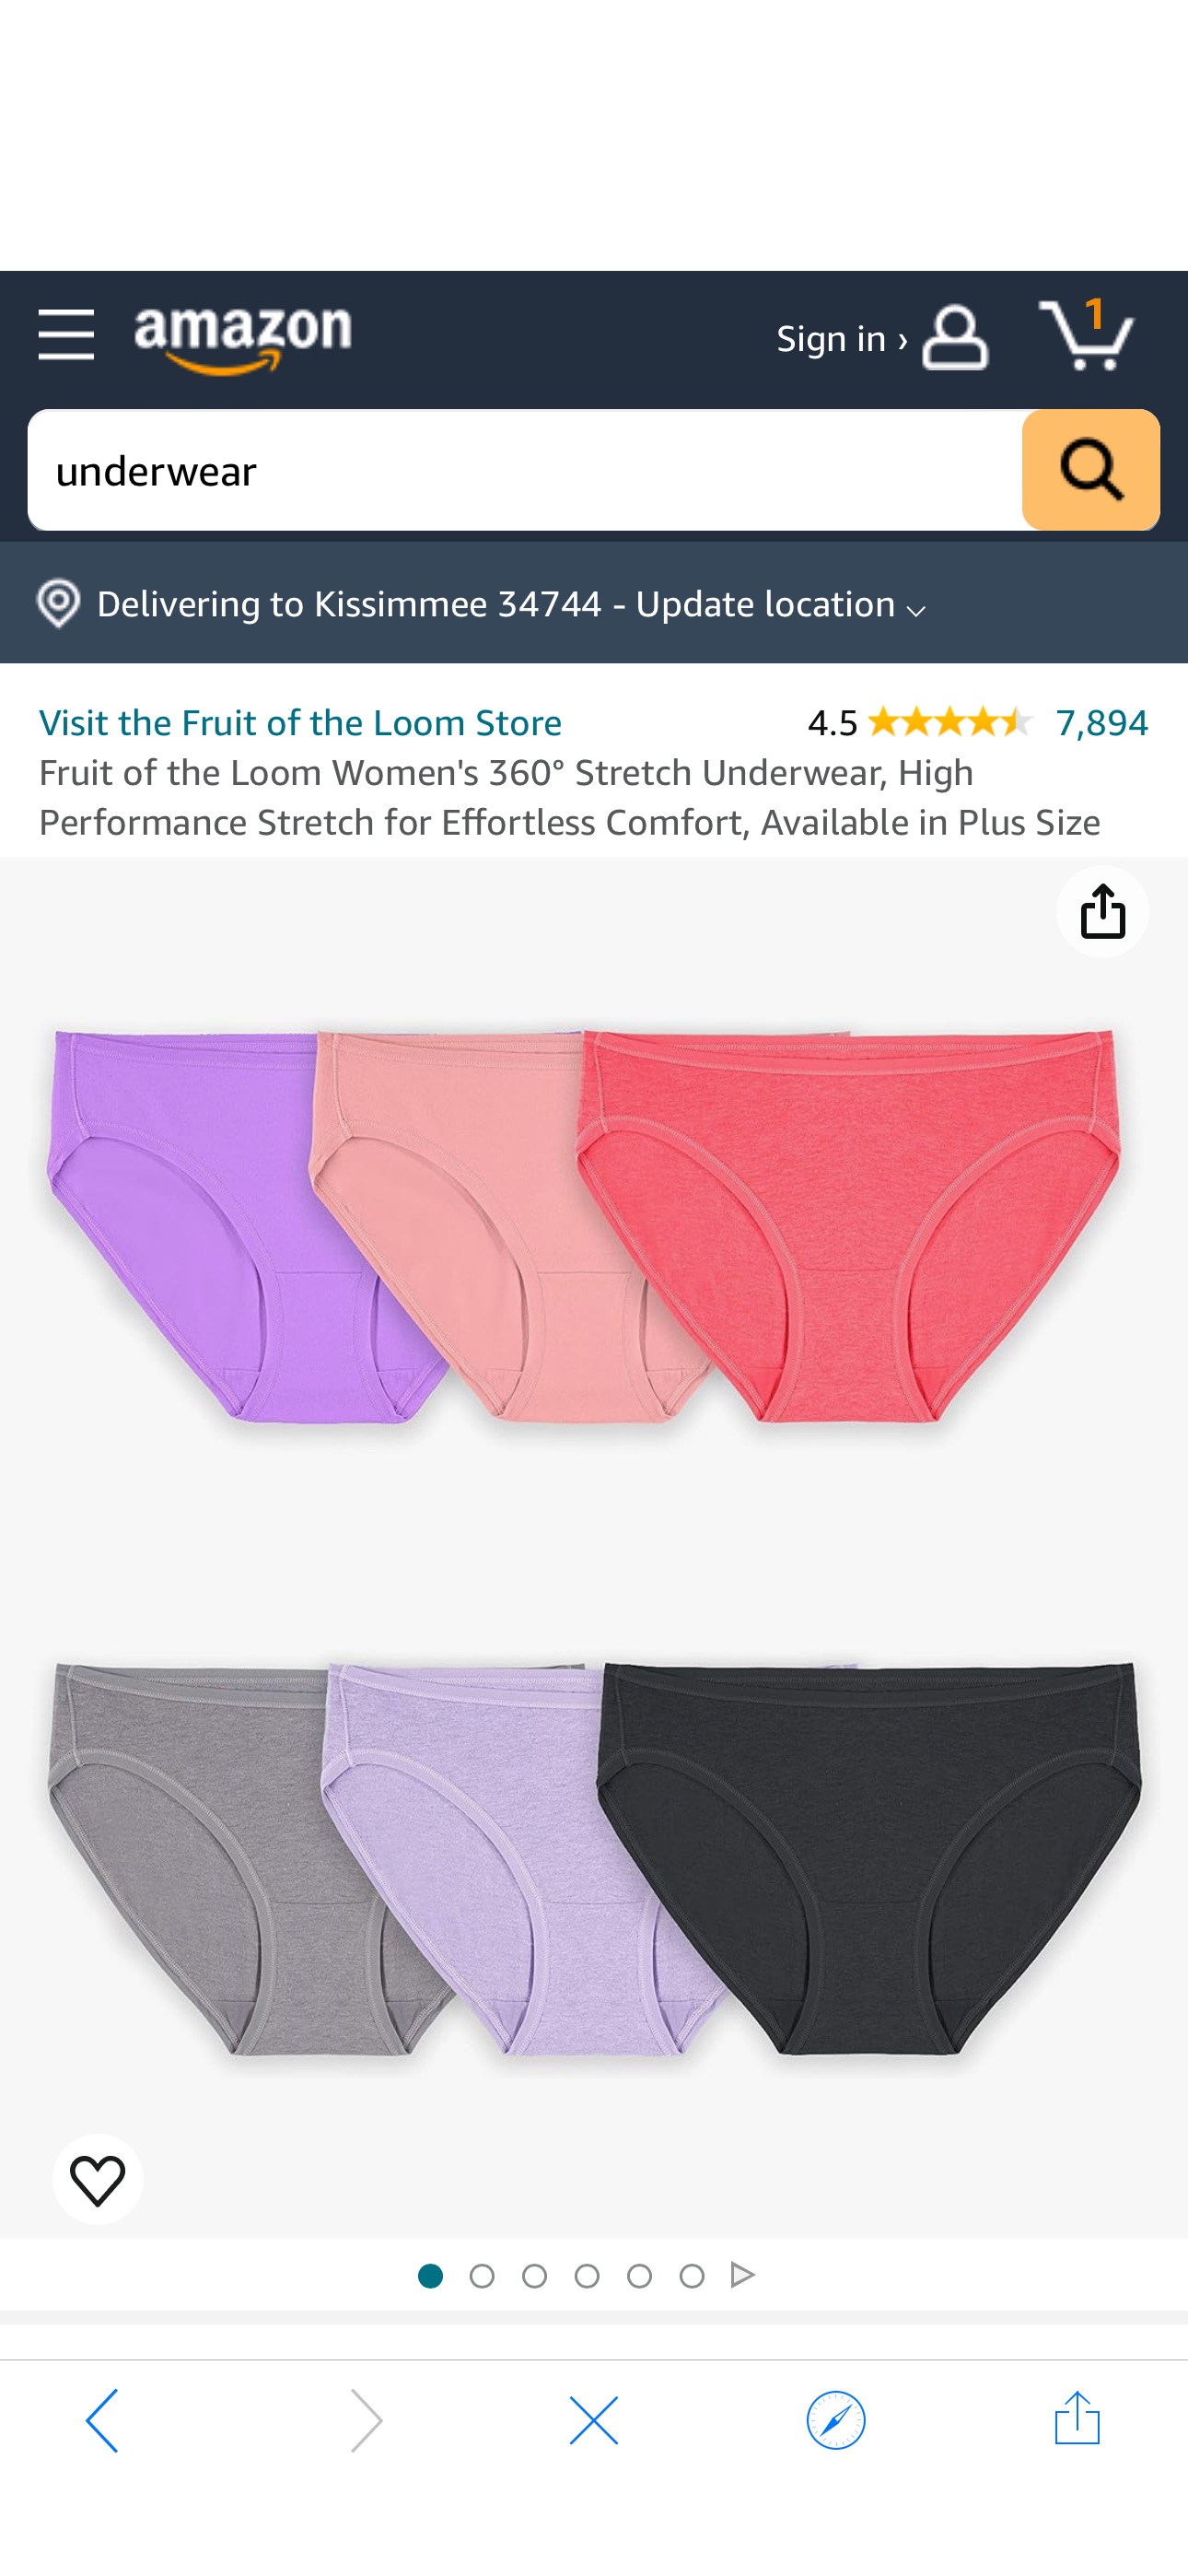 Fruit of the Loom Women's 360 Stretch Cotton Underwear, Available in Plus Sizes, 6-Pack Bikini - Colors Vary at Amazon Women’s Clothing store